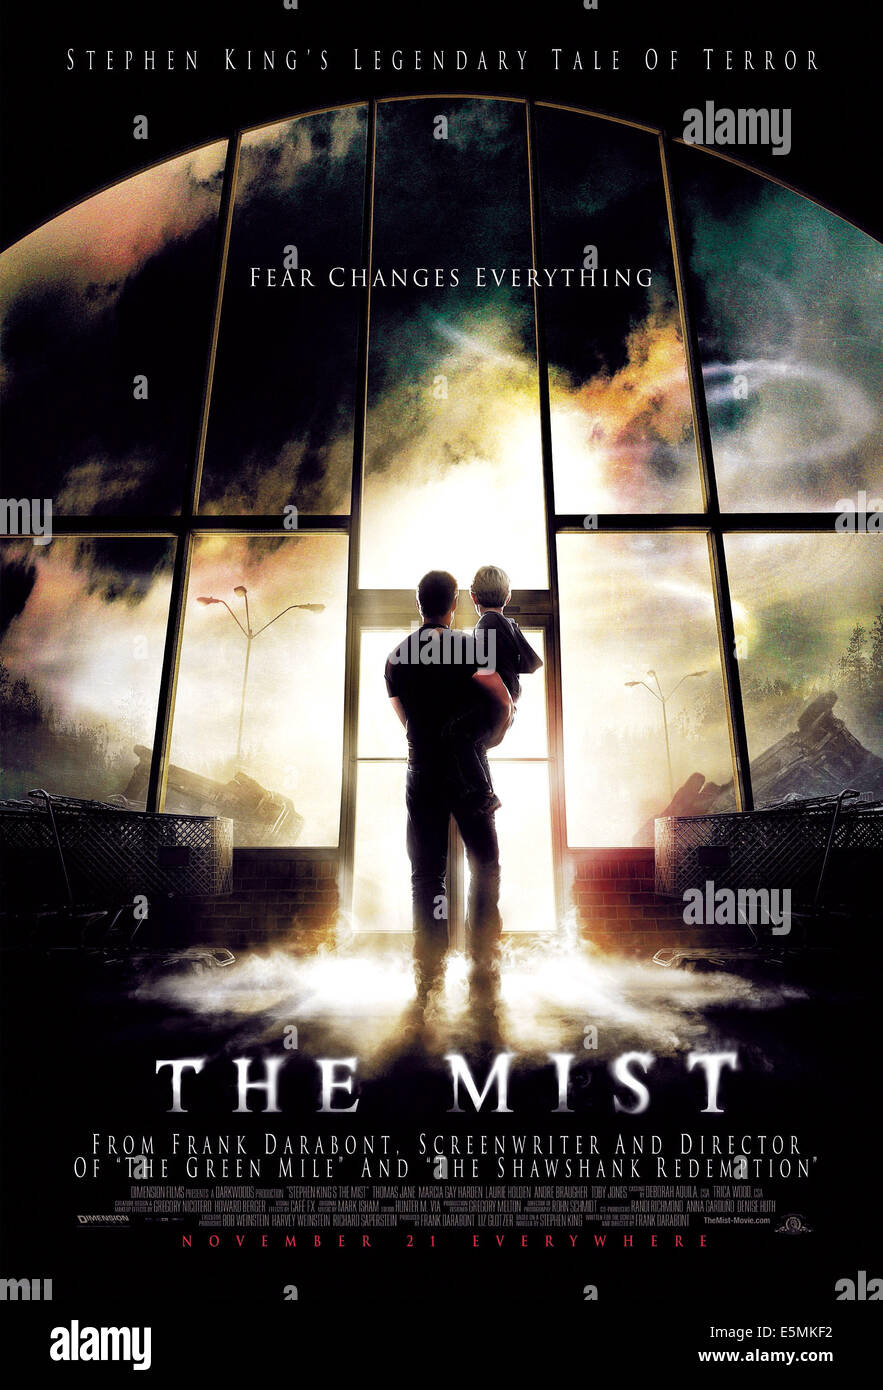 THE MIST, Thomas Jane, Nathan Gamble, 2007. ©Weinstein Company/courtesy  Everett Collection Stock Photo - Alamy